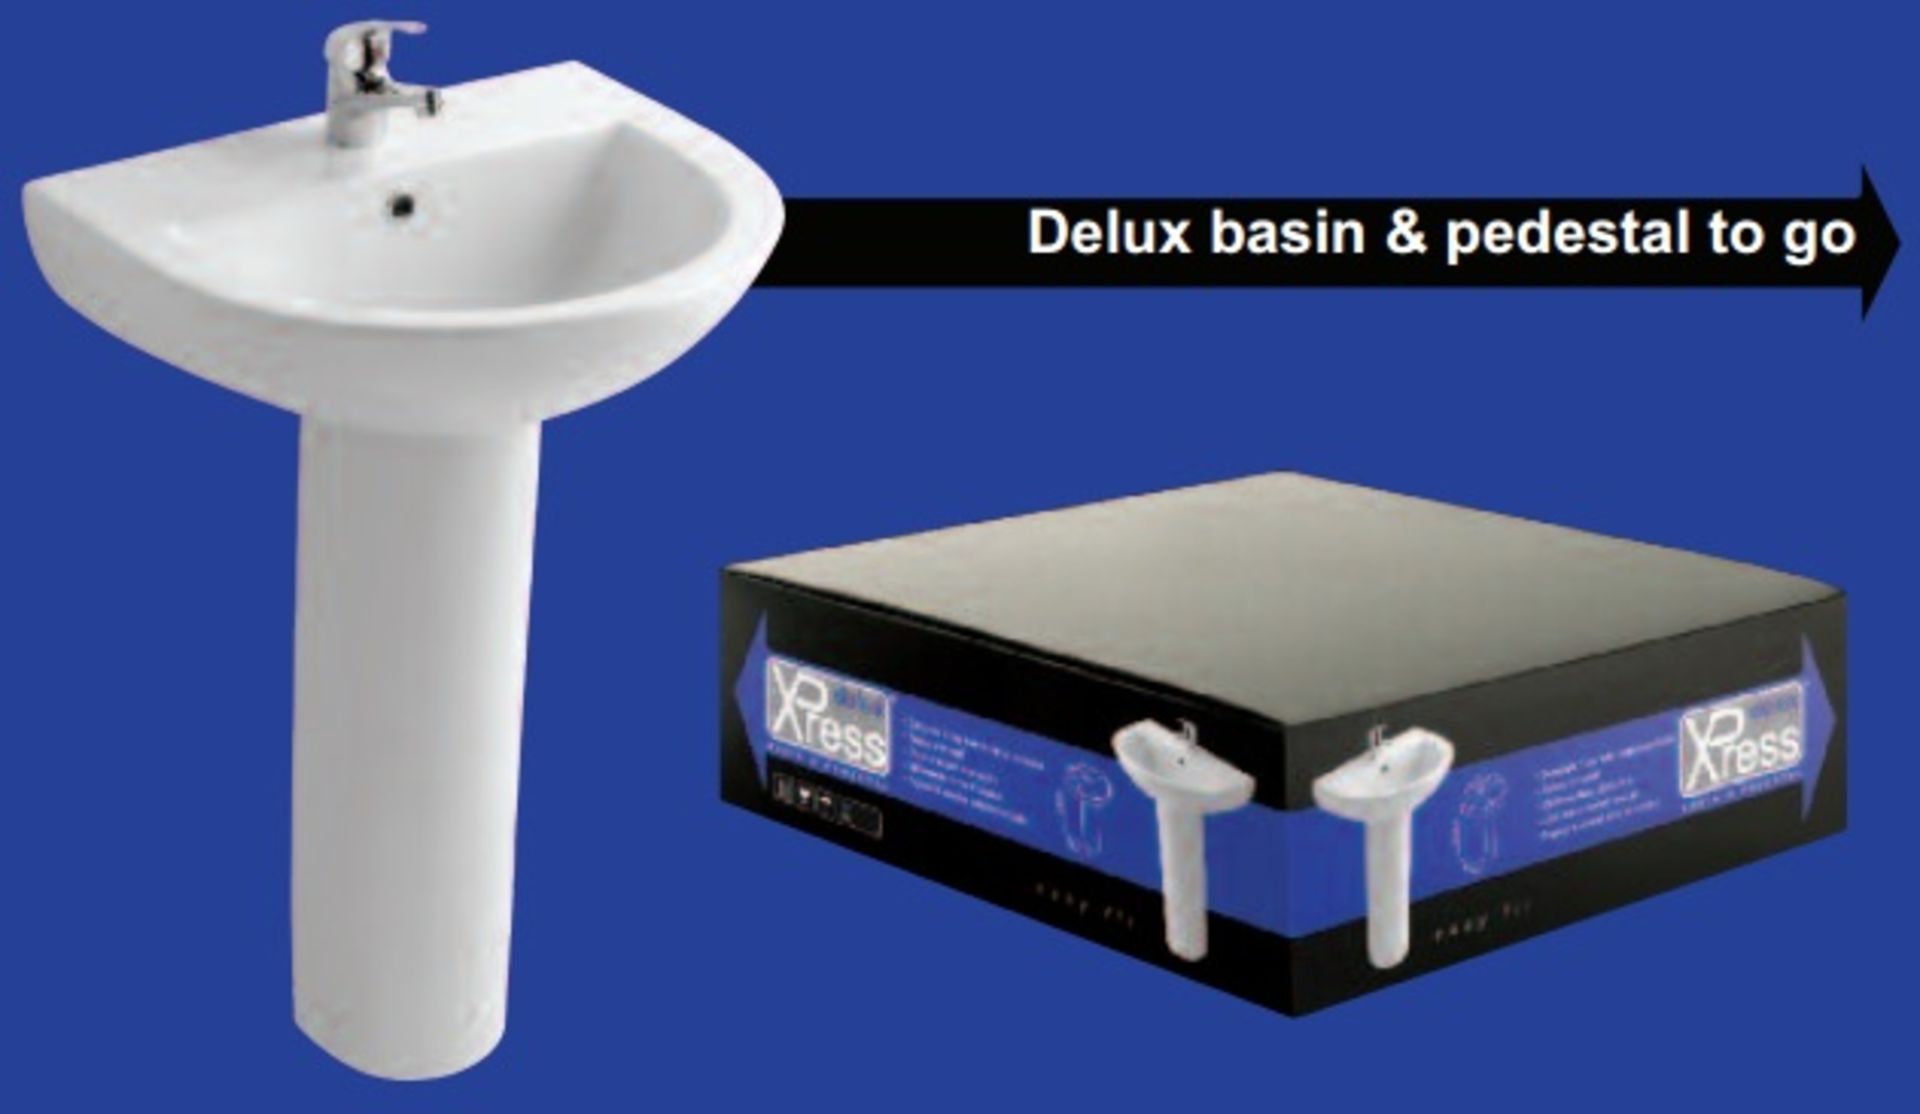 Xpress 1 Tap Hole 550mm Bathroom Sink Basins with Pedestals - Brand New and Boxed - Ultra